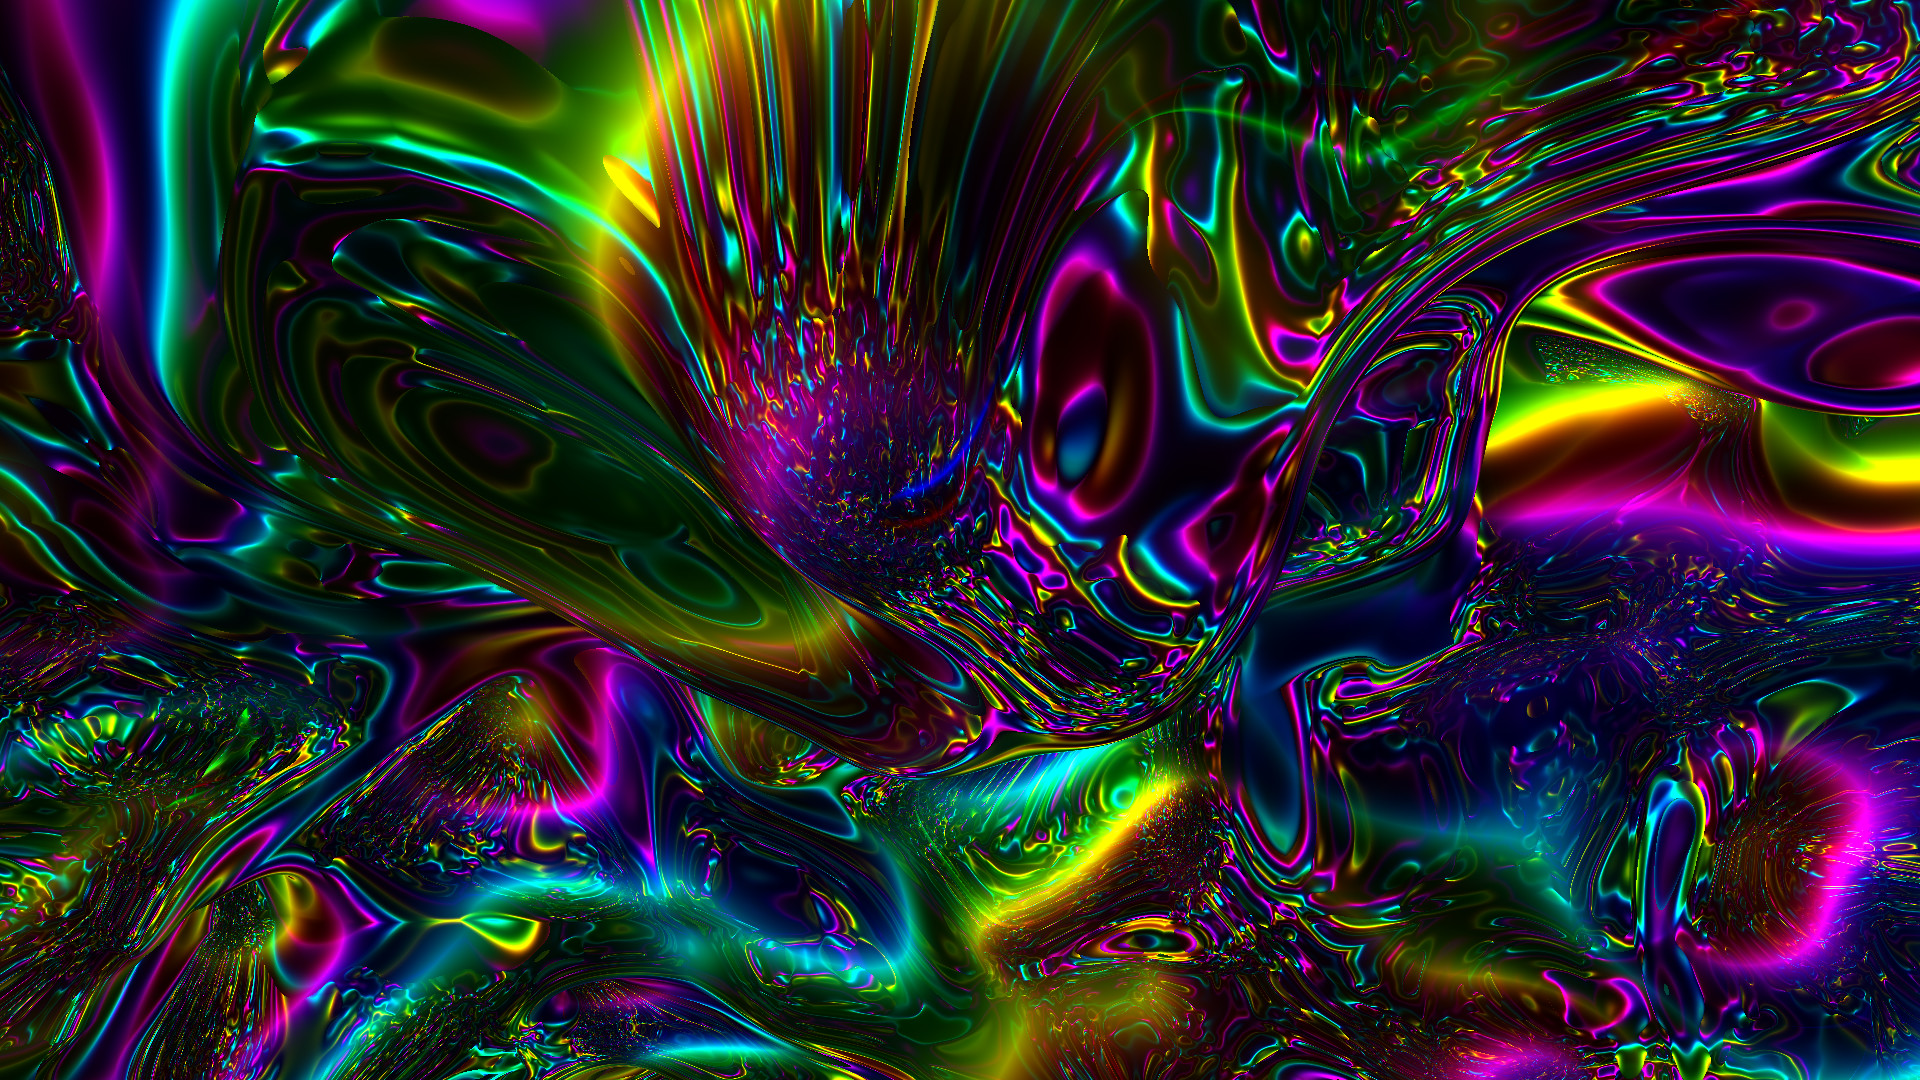 1920x1080 wallpaper 1080p displaying 10 images for psychedelic wallpaper 1080p .